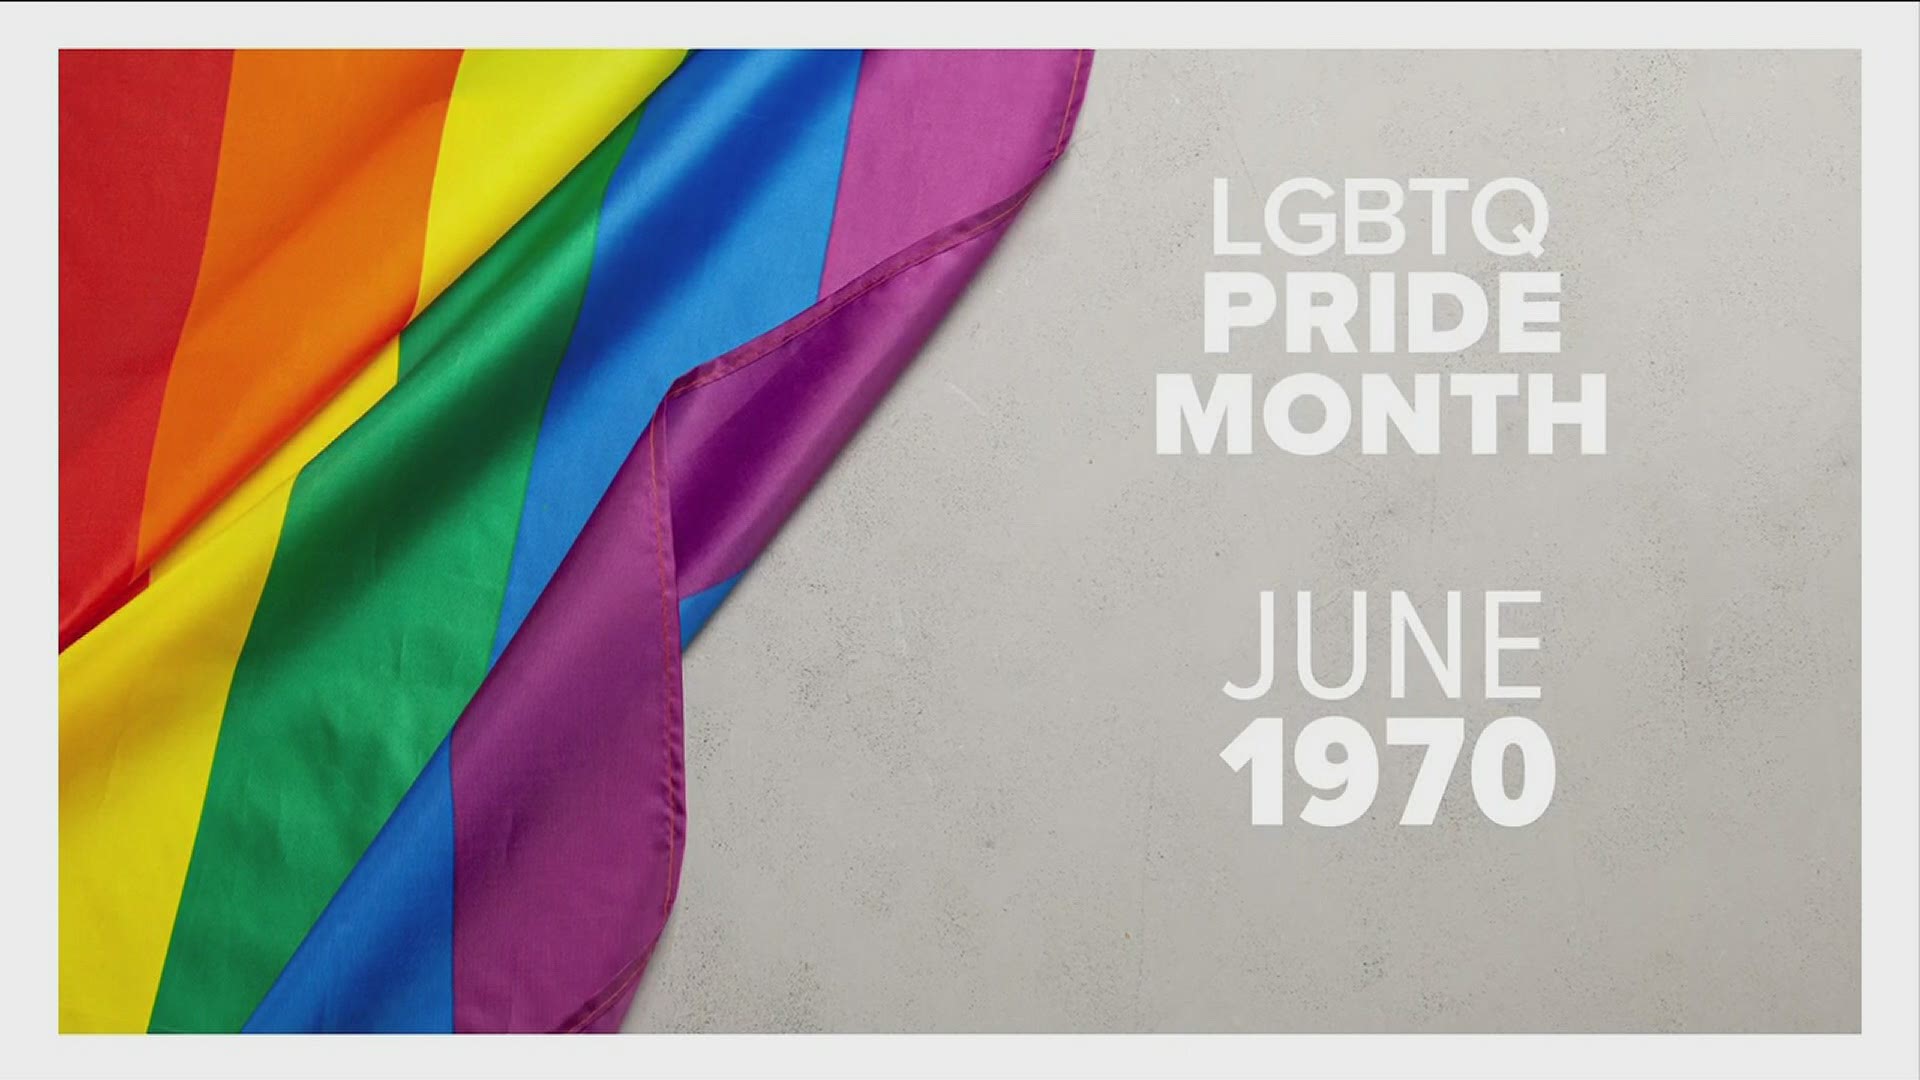 LGBTQ Pride Month started in June 1970, commemorating the first anniversary of the Stonewall uprising in New York City.